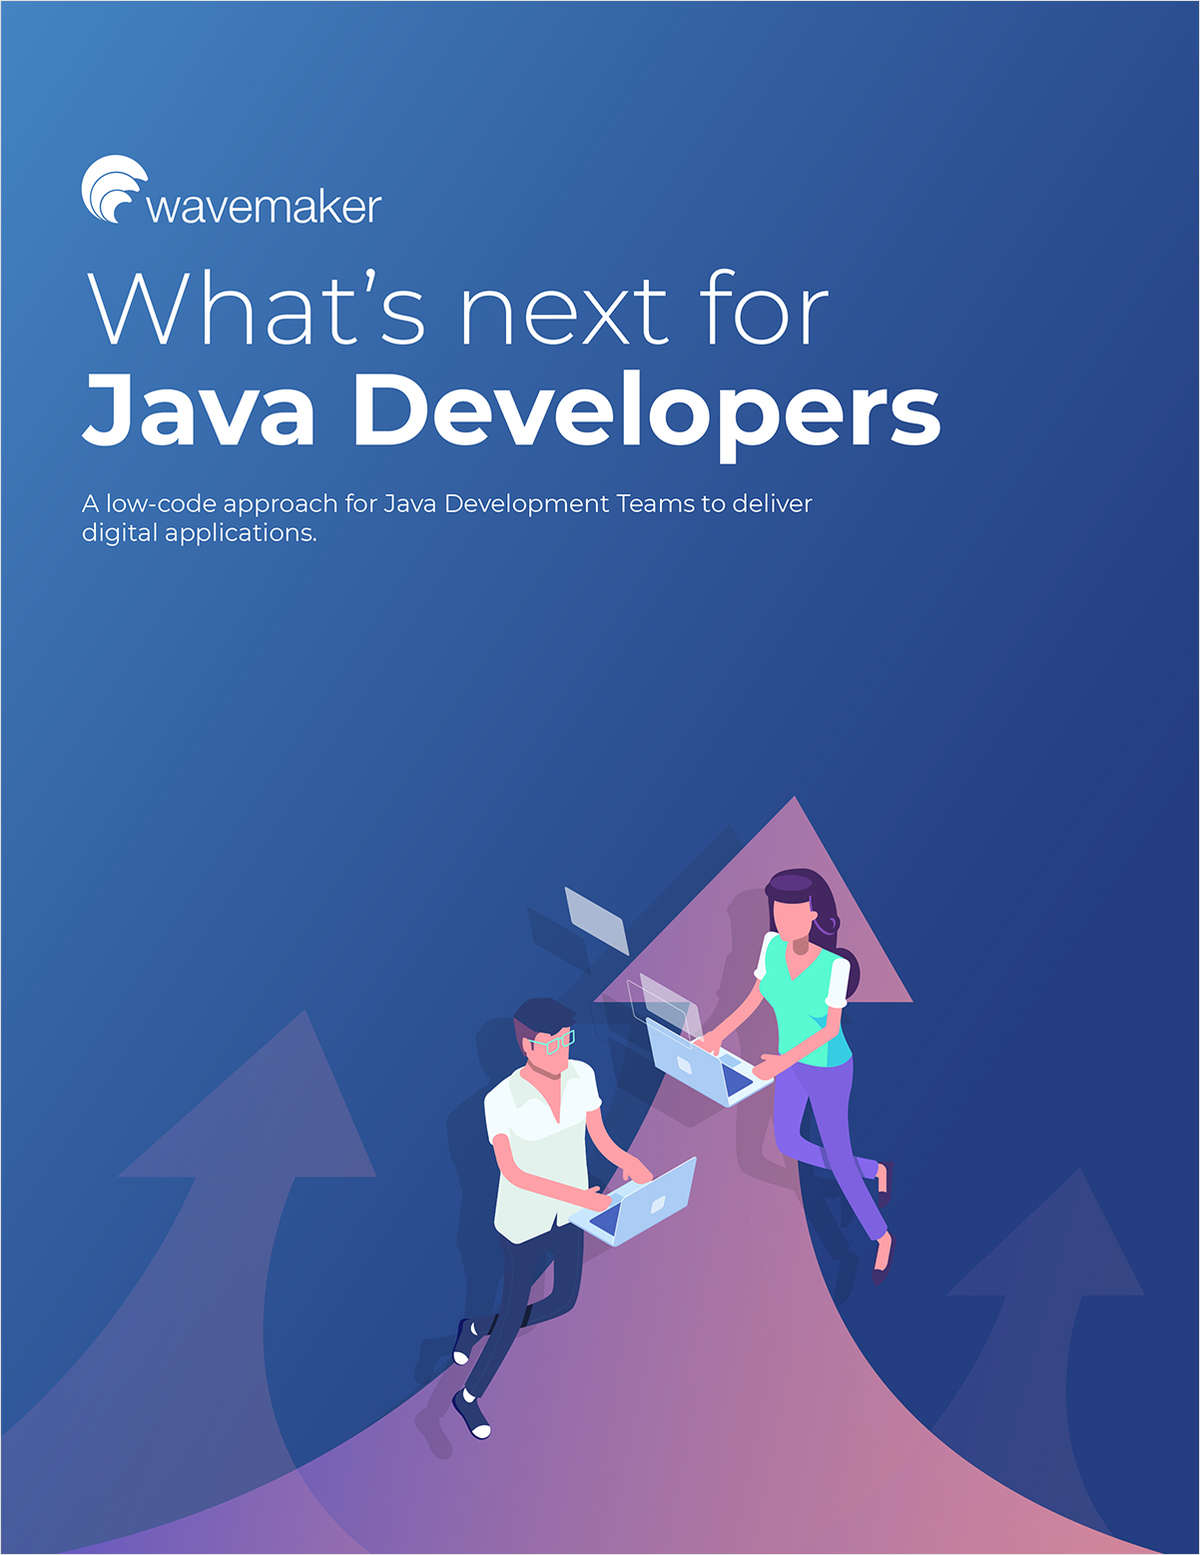 Empowering Java Development Teams to Deliver Digital Applications Using Low-Code